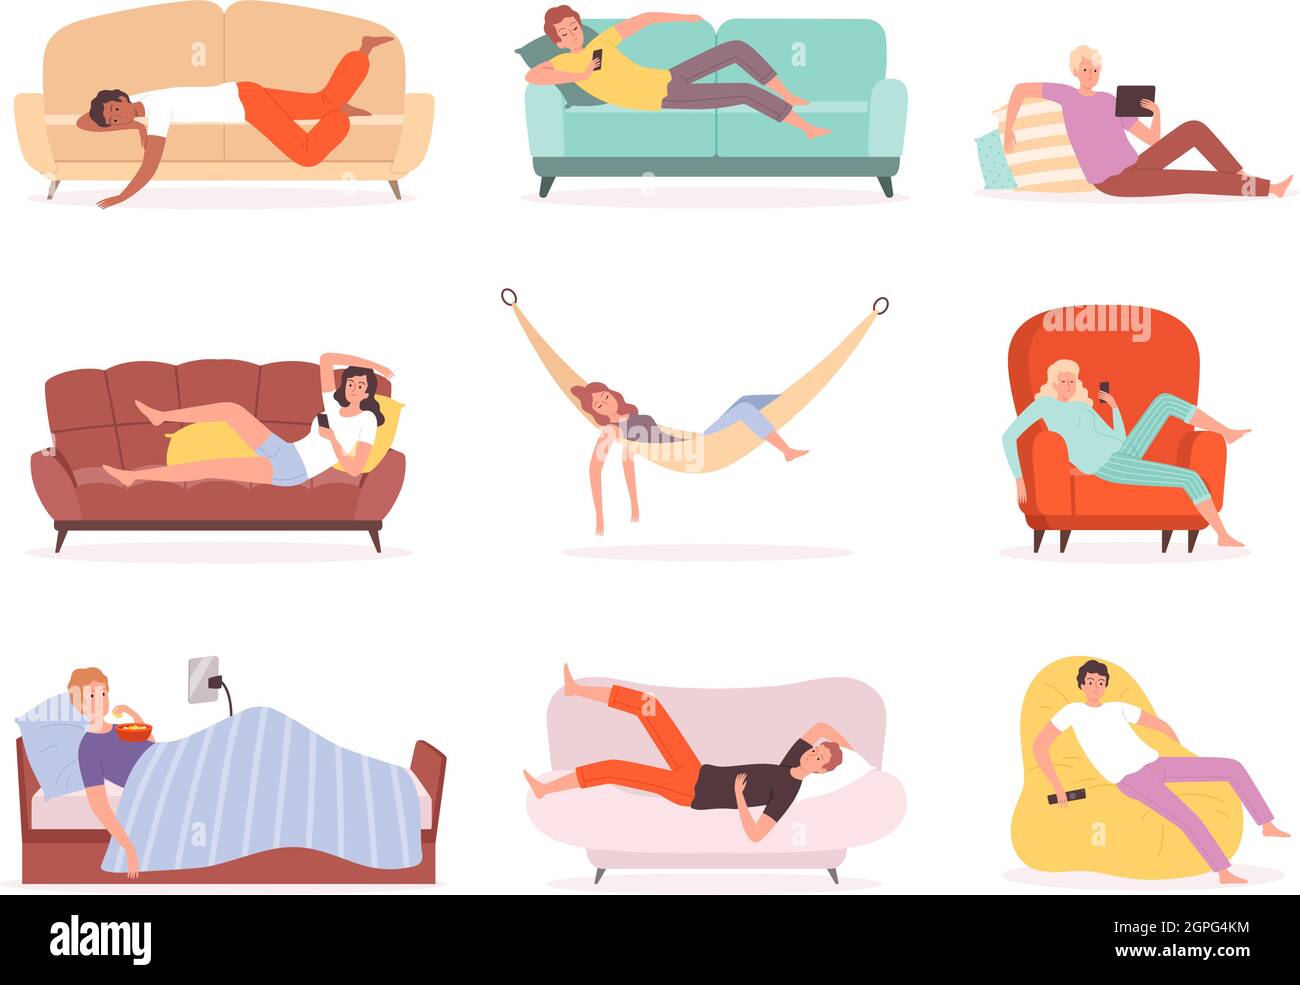 Laying people. Characters relaxing and watching tv on sofa lying lifestyle comfortable sleeping or sitting in armchair vector persons Stock Vector